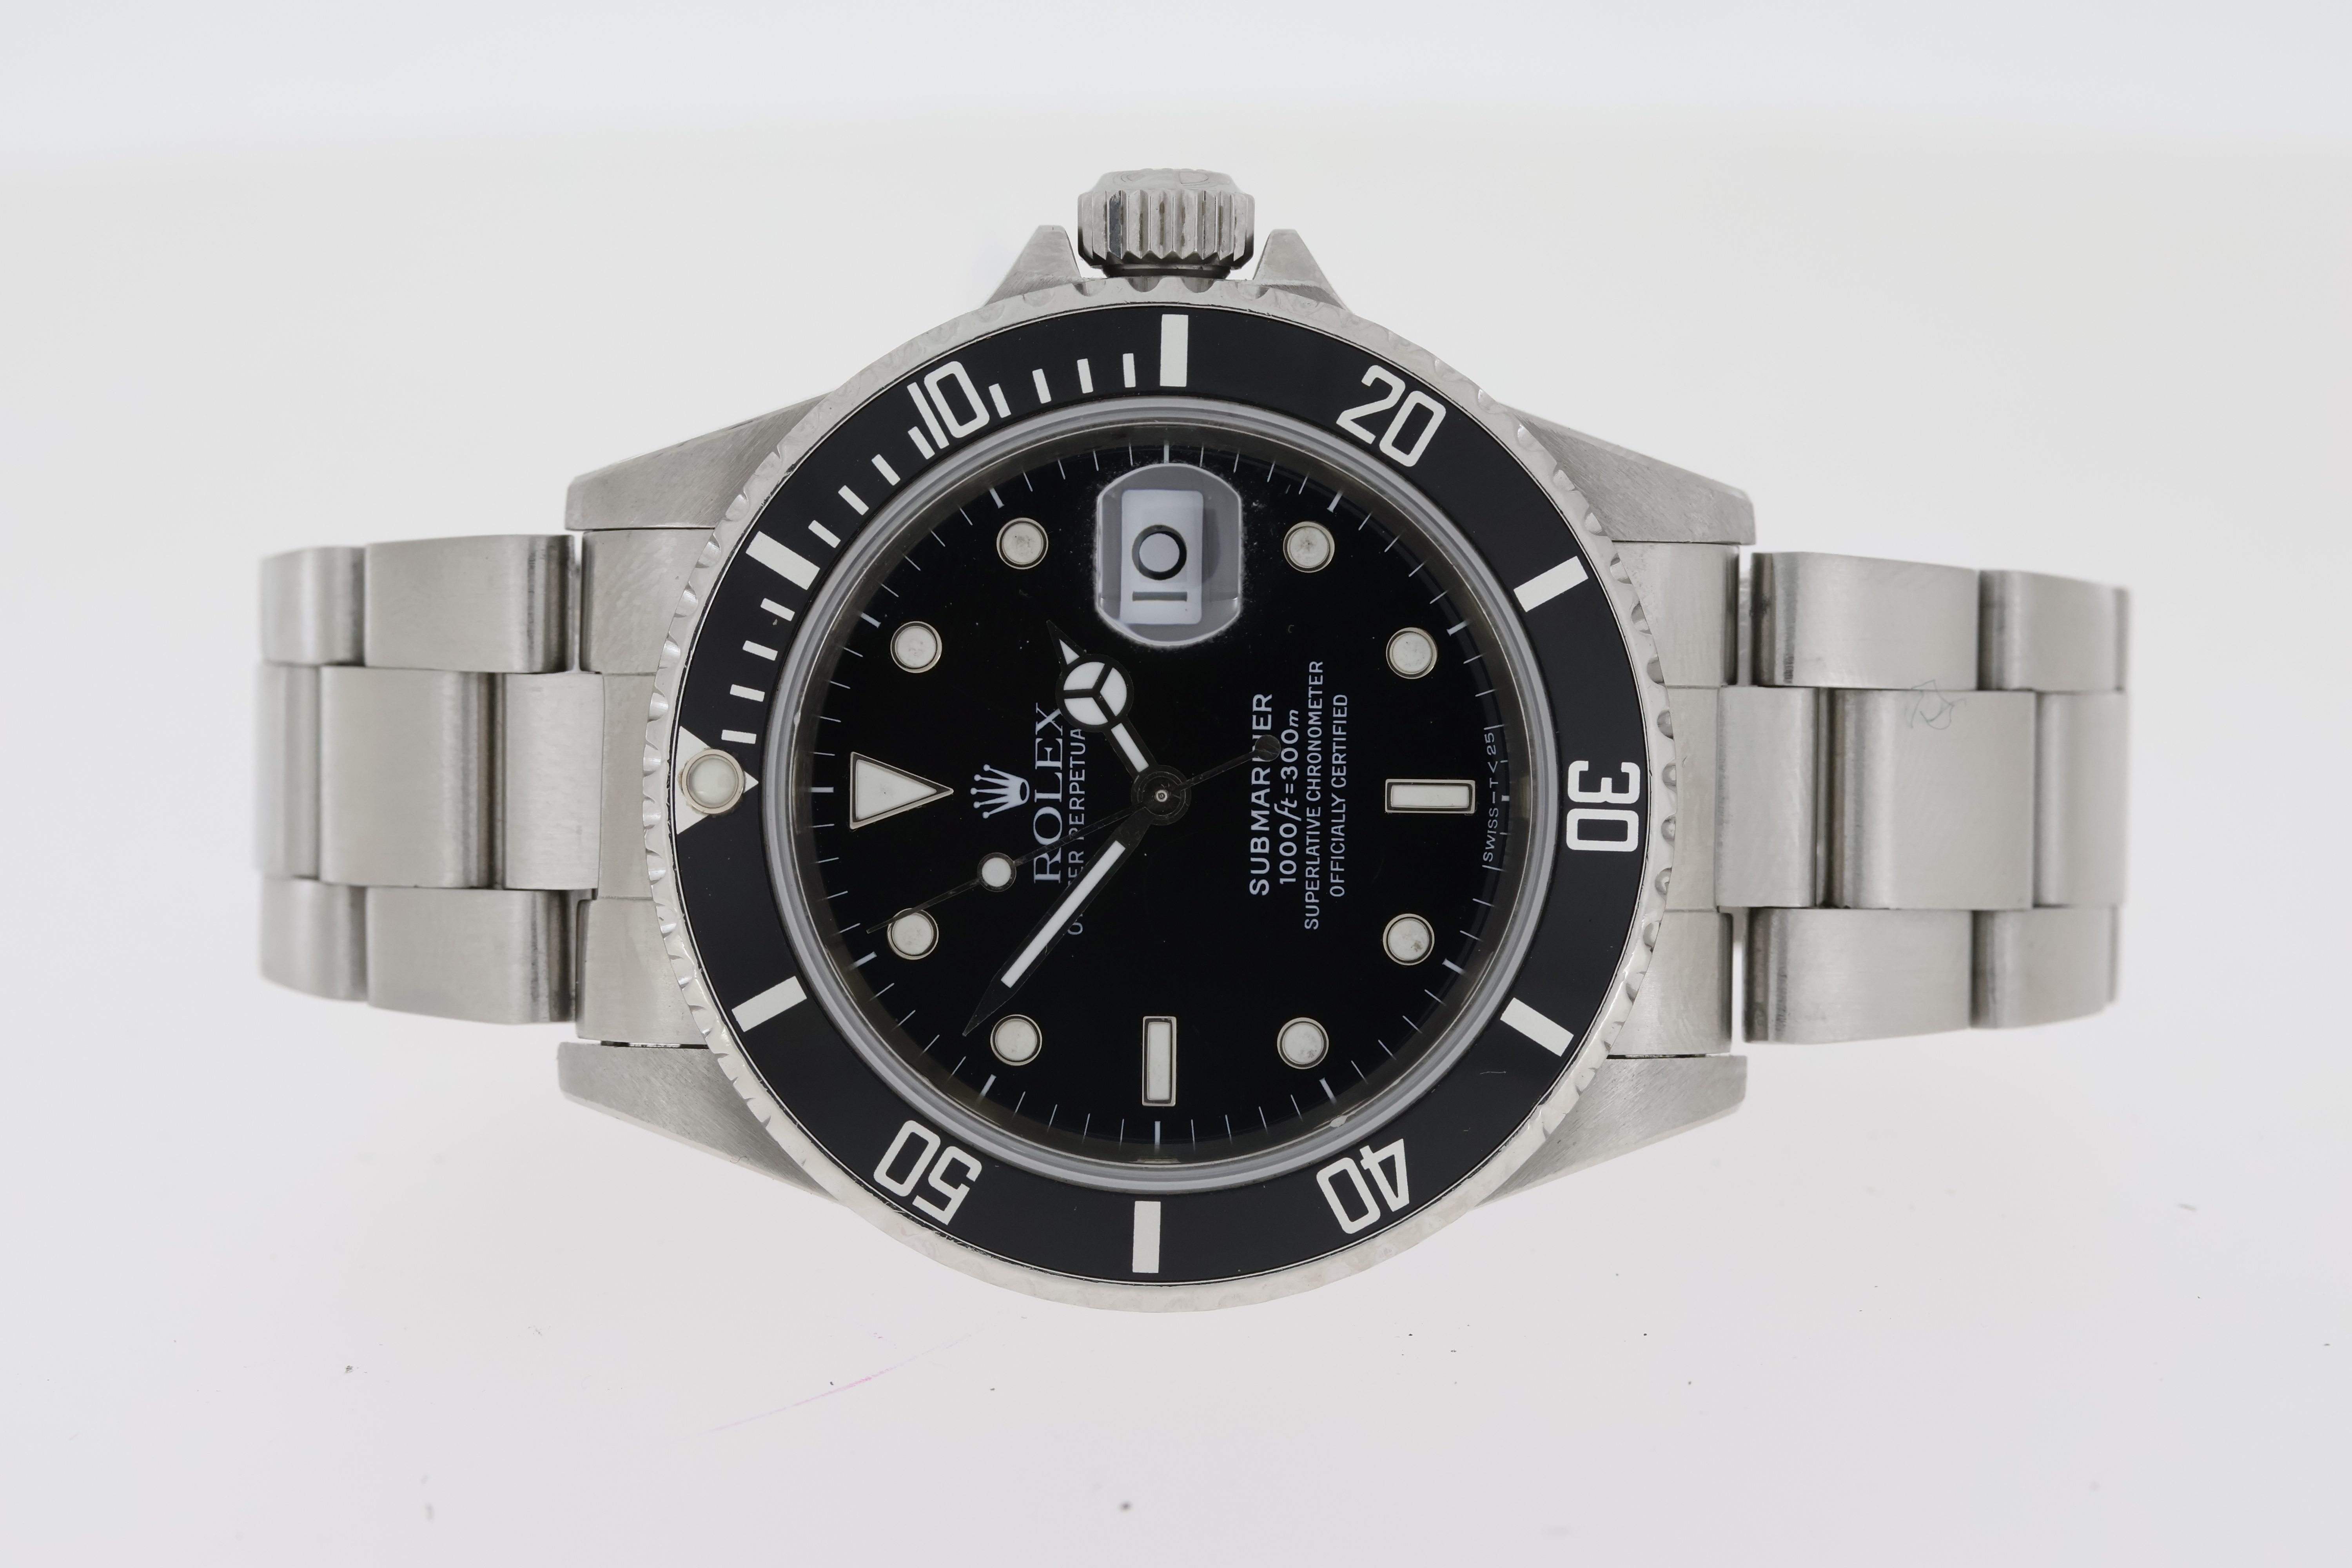 Rolex Submariner Date Reference 16610 With Papers 1990 - Image 2 of 6